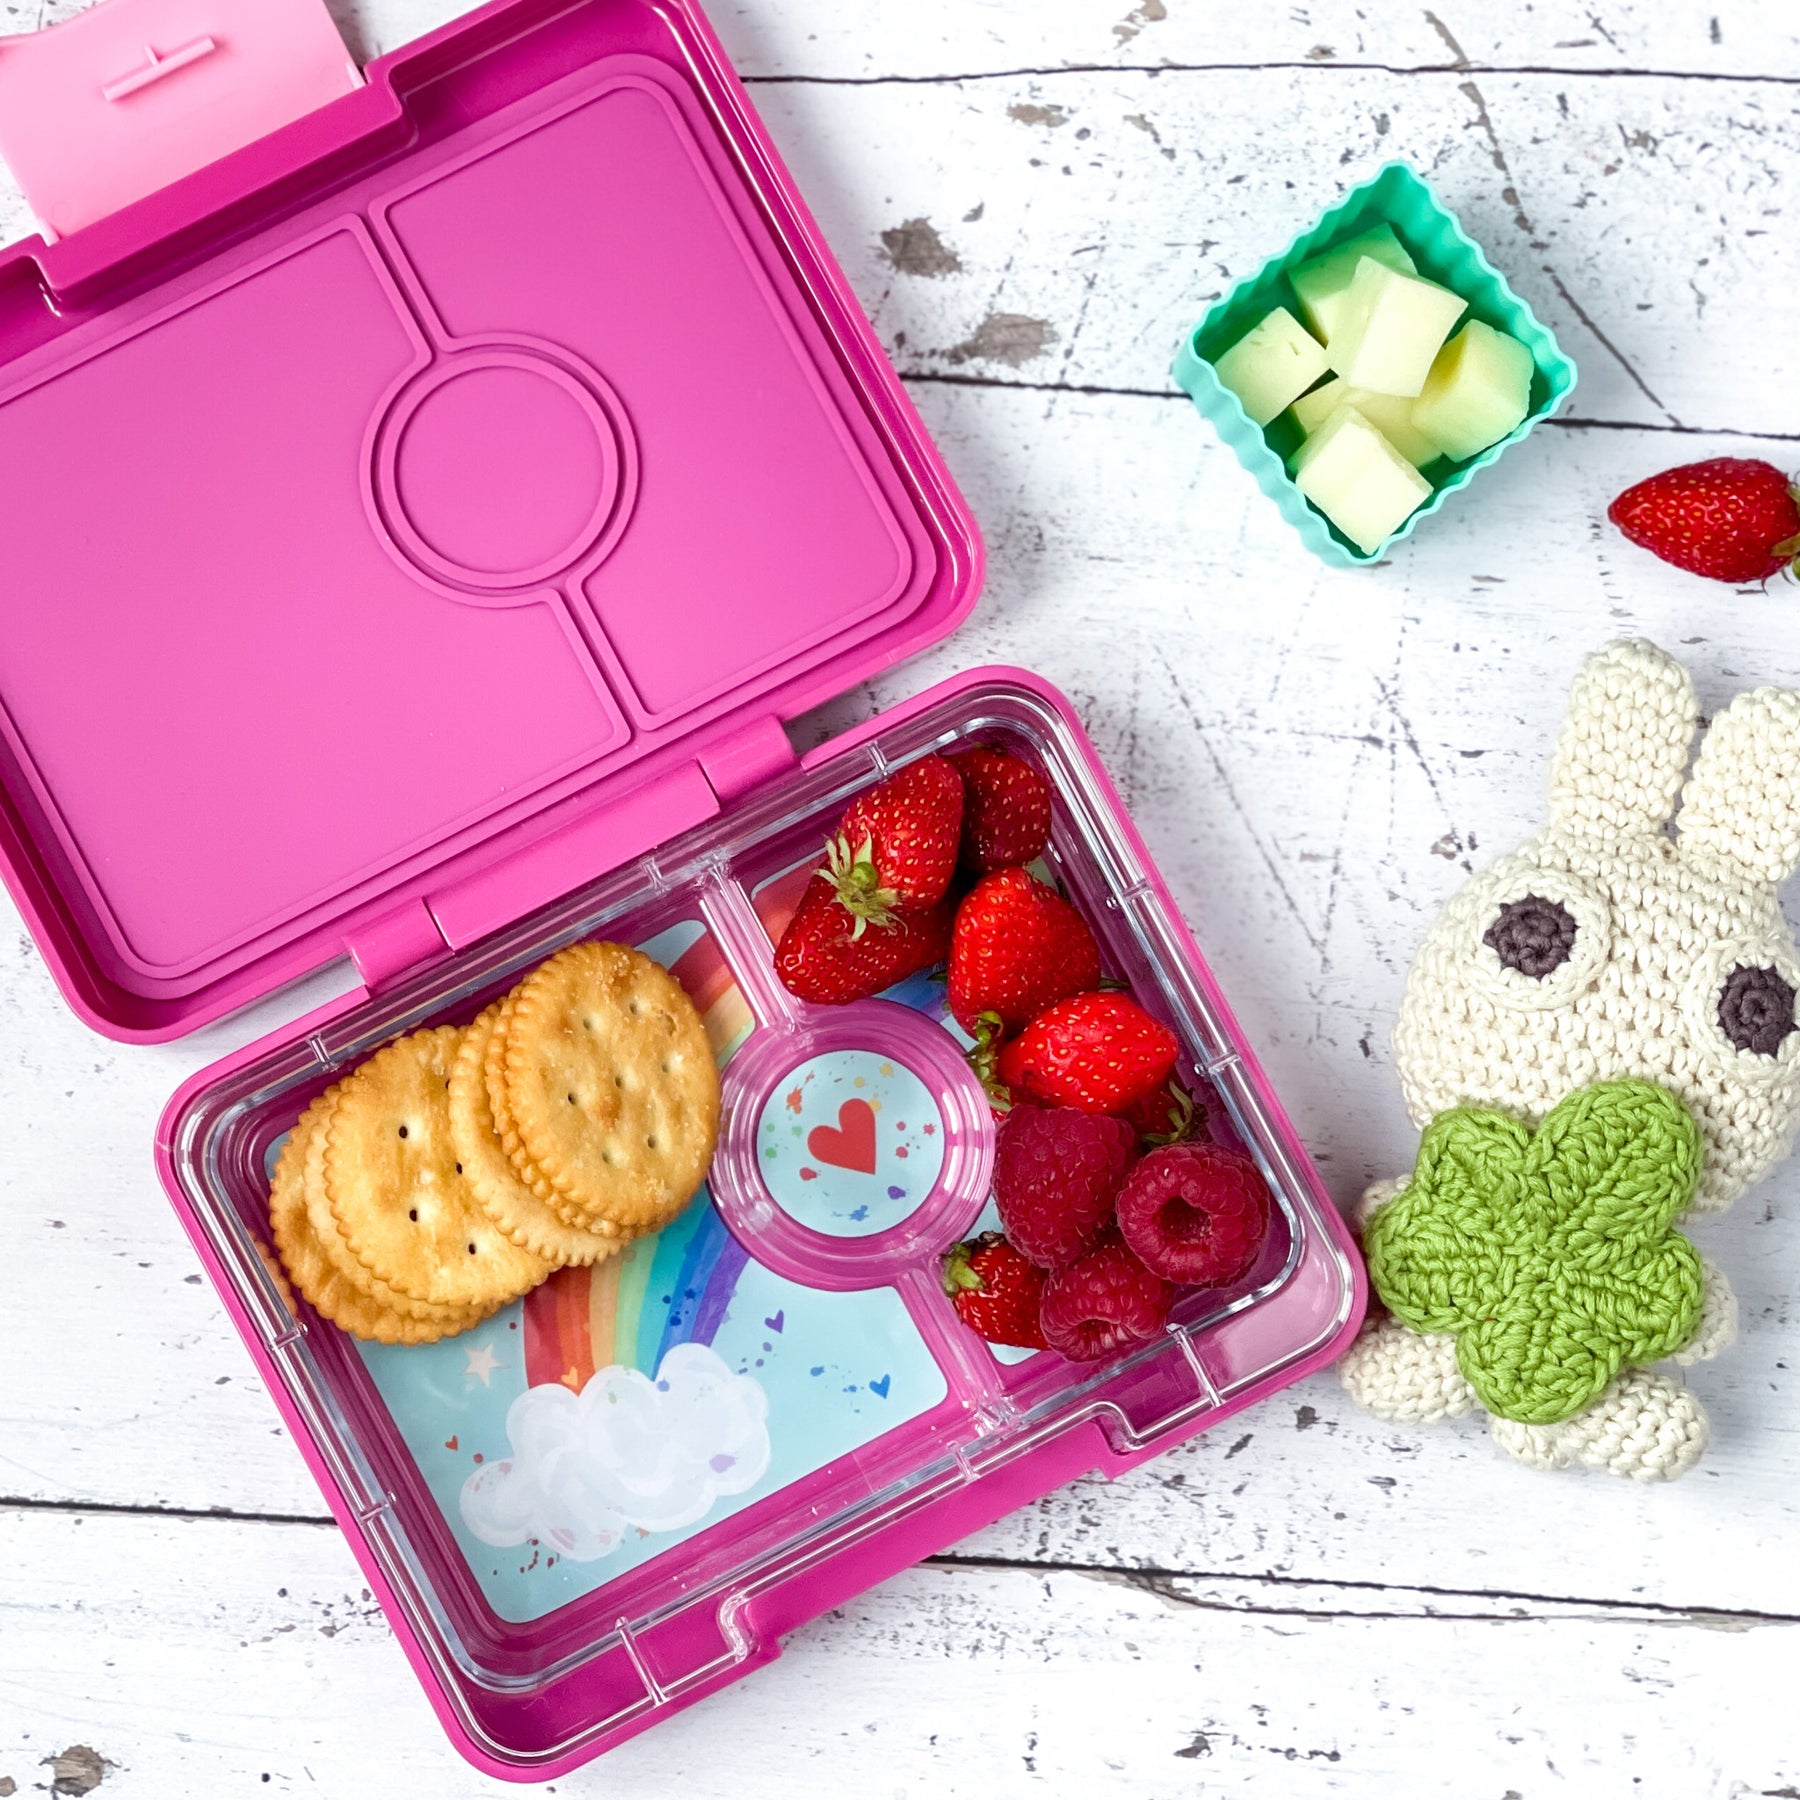 Yumbox Dreamy Purple- Leakproof Bento Lunch Box for Kids